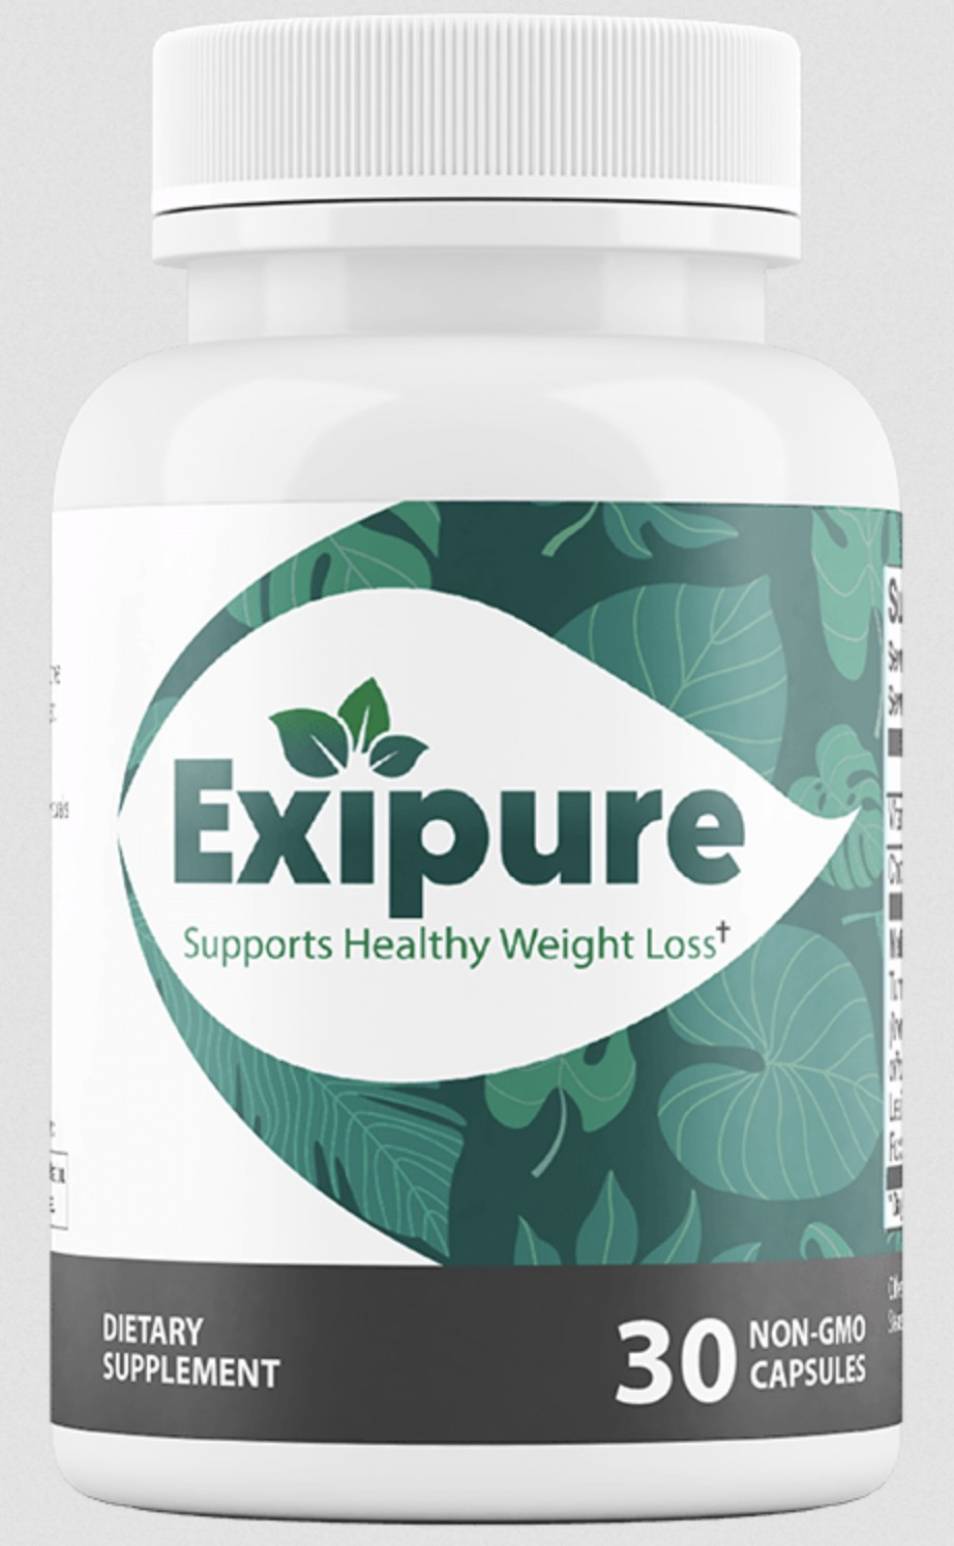 Results Of Exipure